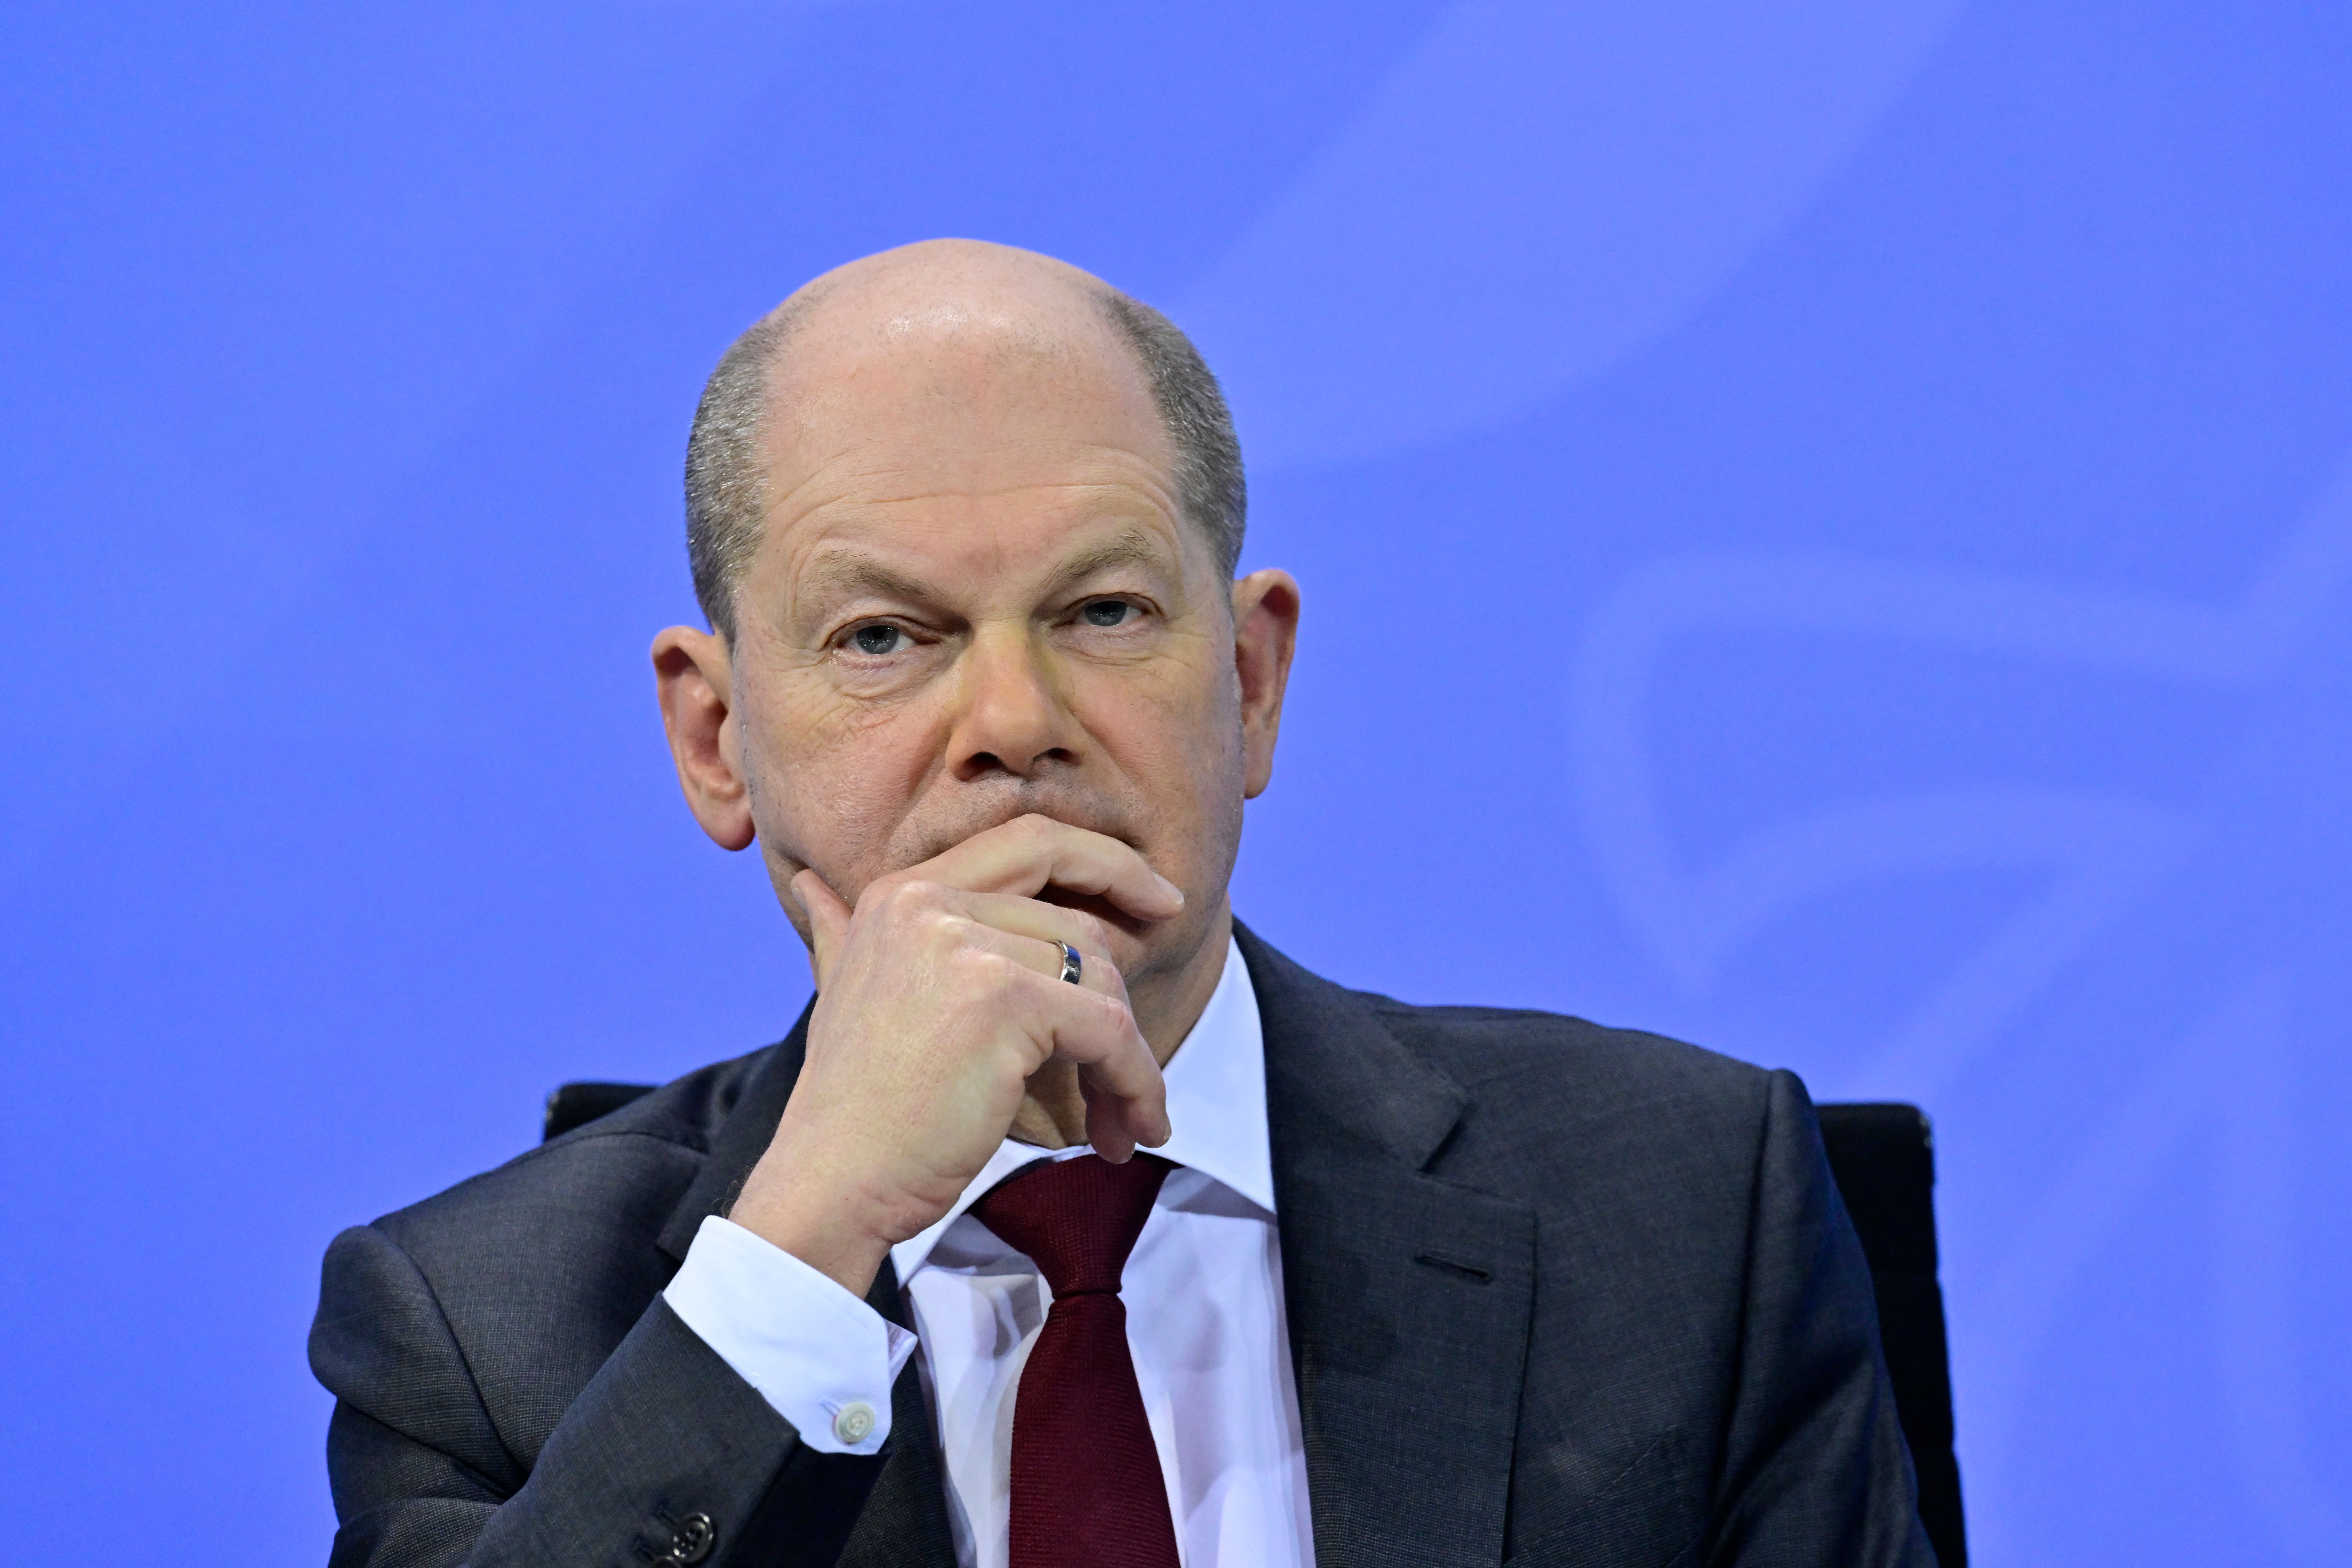 German Chancellor Olaf Scholz addresses a press conference following a meeting on measures to curb the coronavirus COVID-19 pandemic with the heads of government of Germany's federal states at the Chancellery in Berlin on January 7, 2022. 